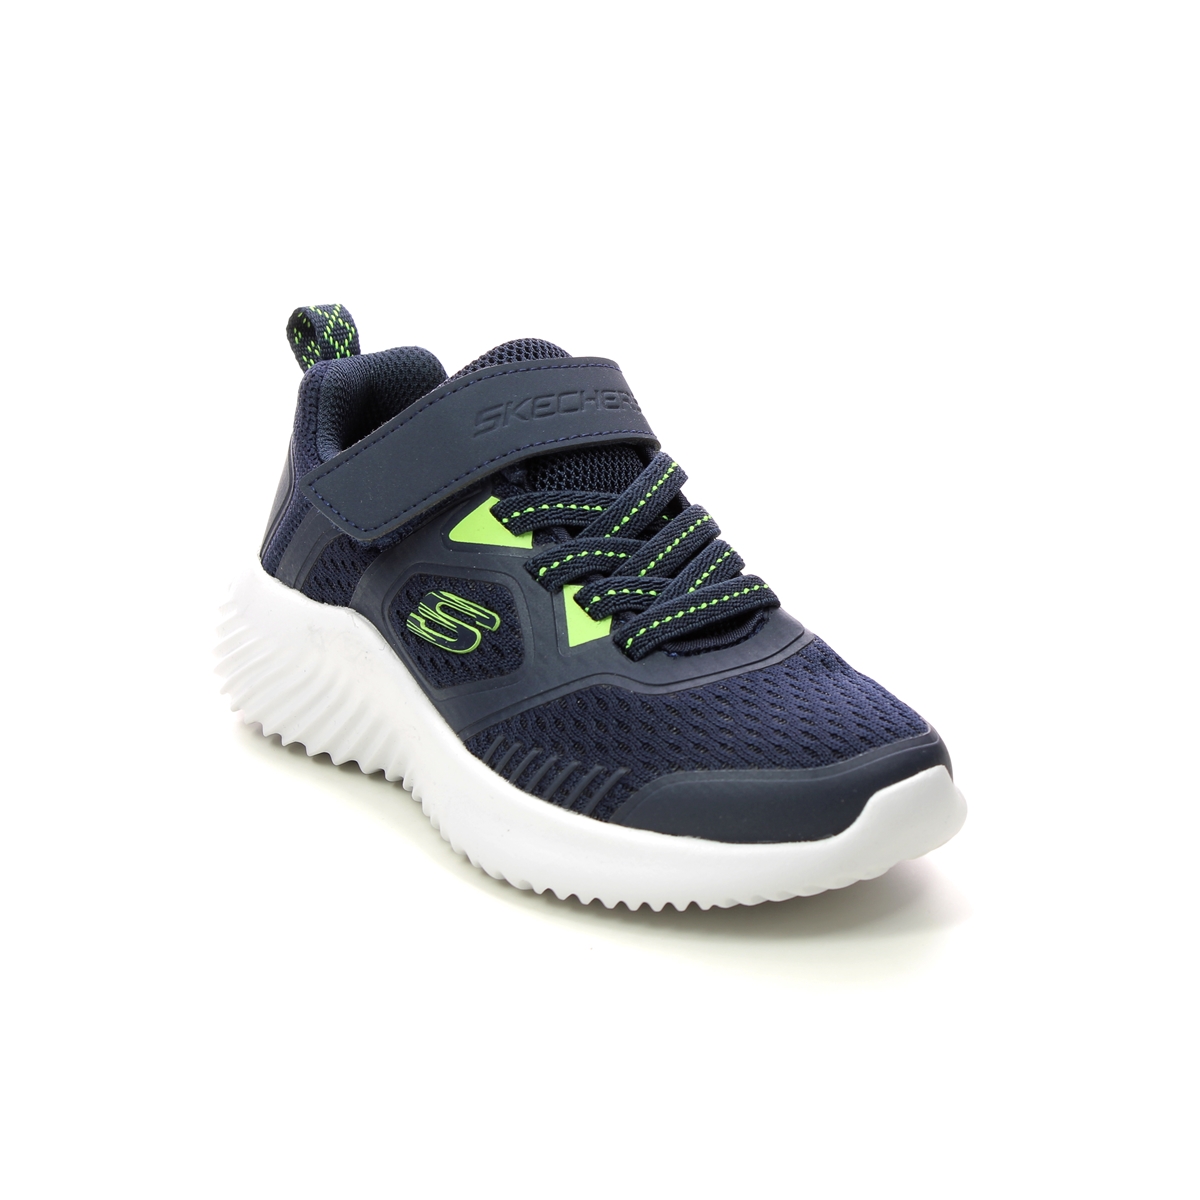 Skechers Bounder Navy Lime Kids Trainers 403736L In Size 33 In Plain Navy Lime For kids